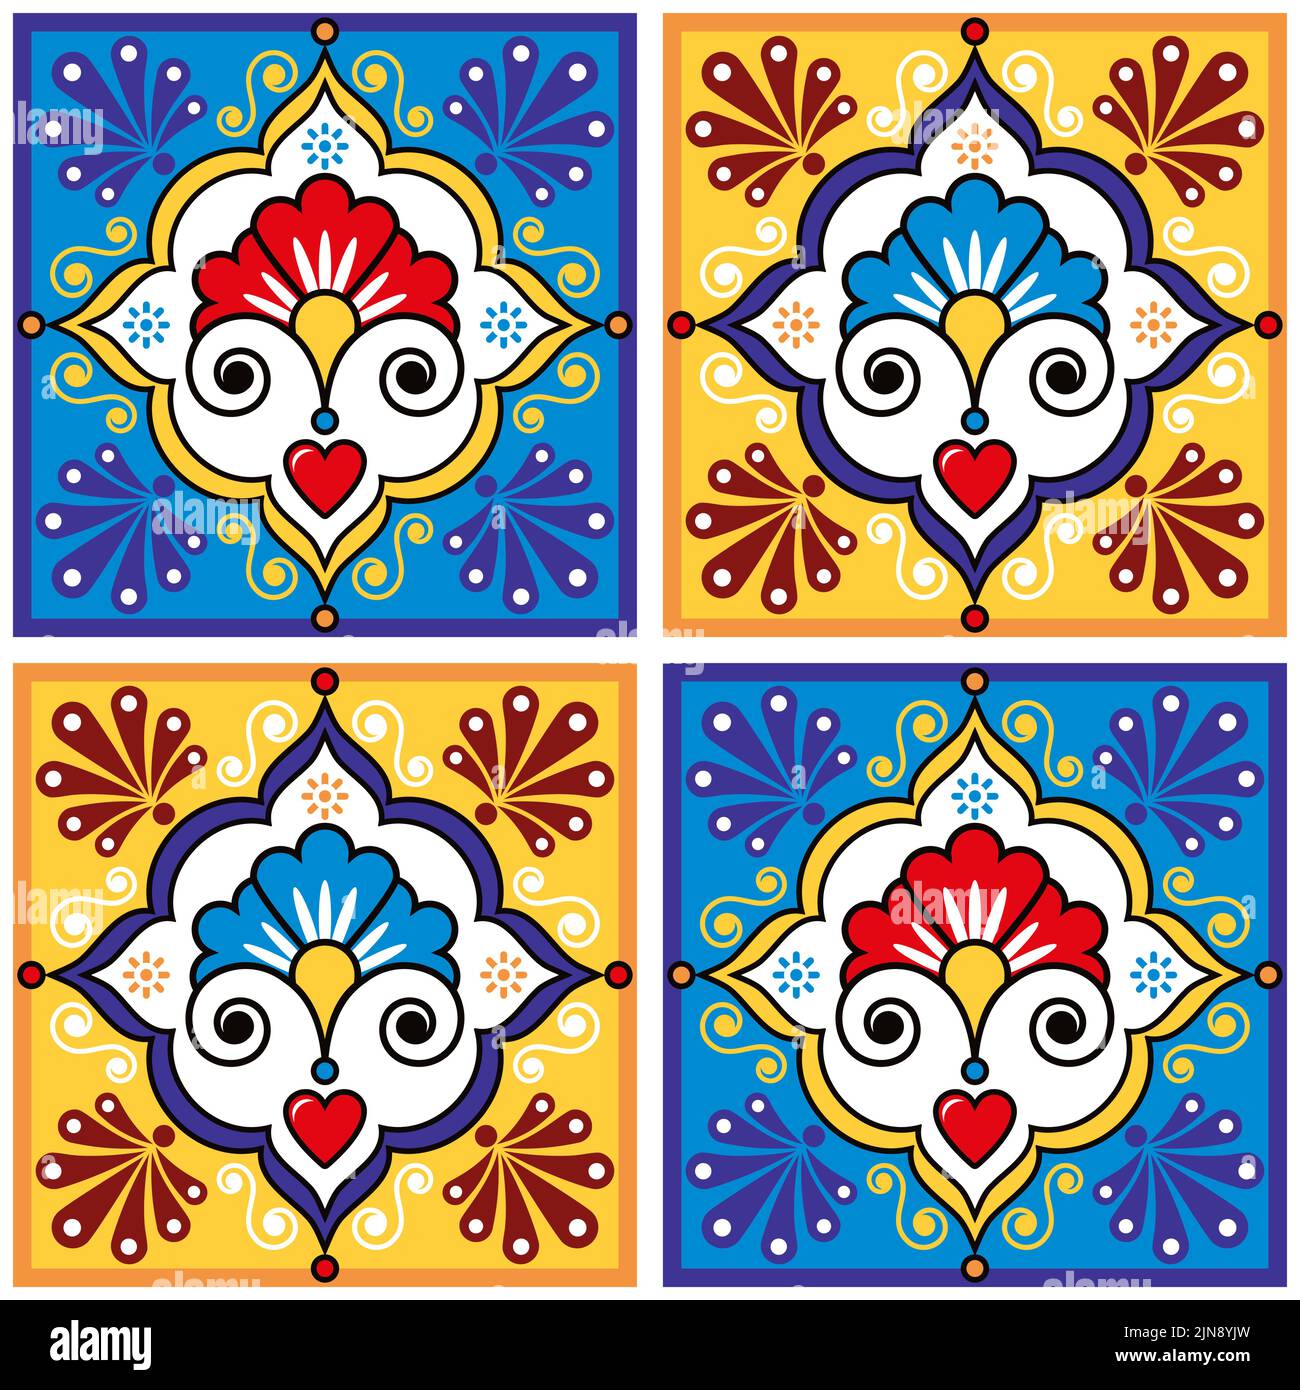 Mexican talavera ceramic tile vector seamless pattern with flowers, hearts and swirls inspired by folk art from Mexico Stock Vector